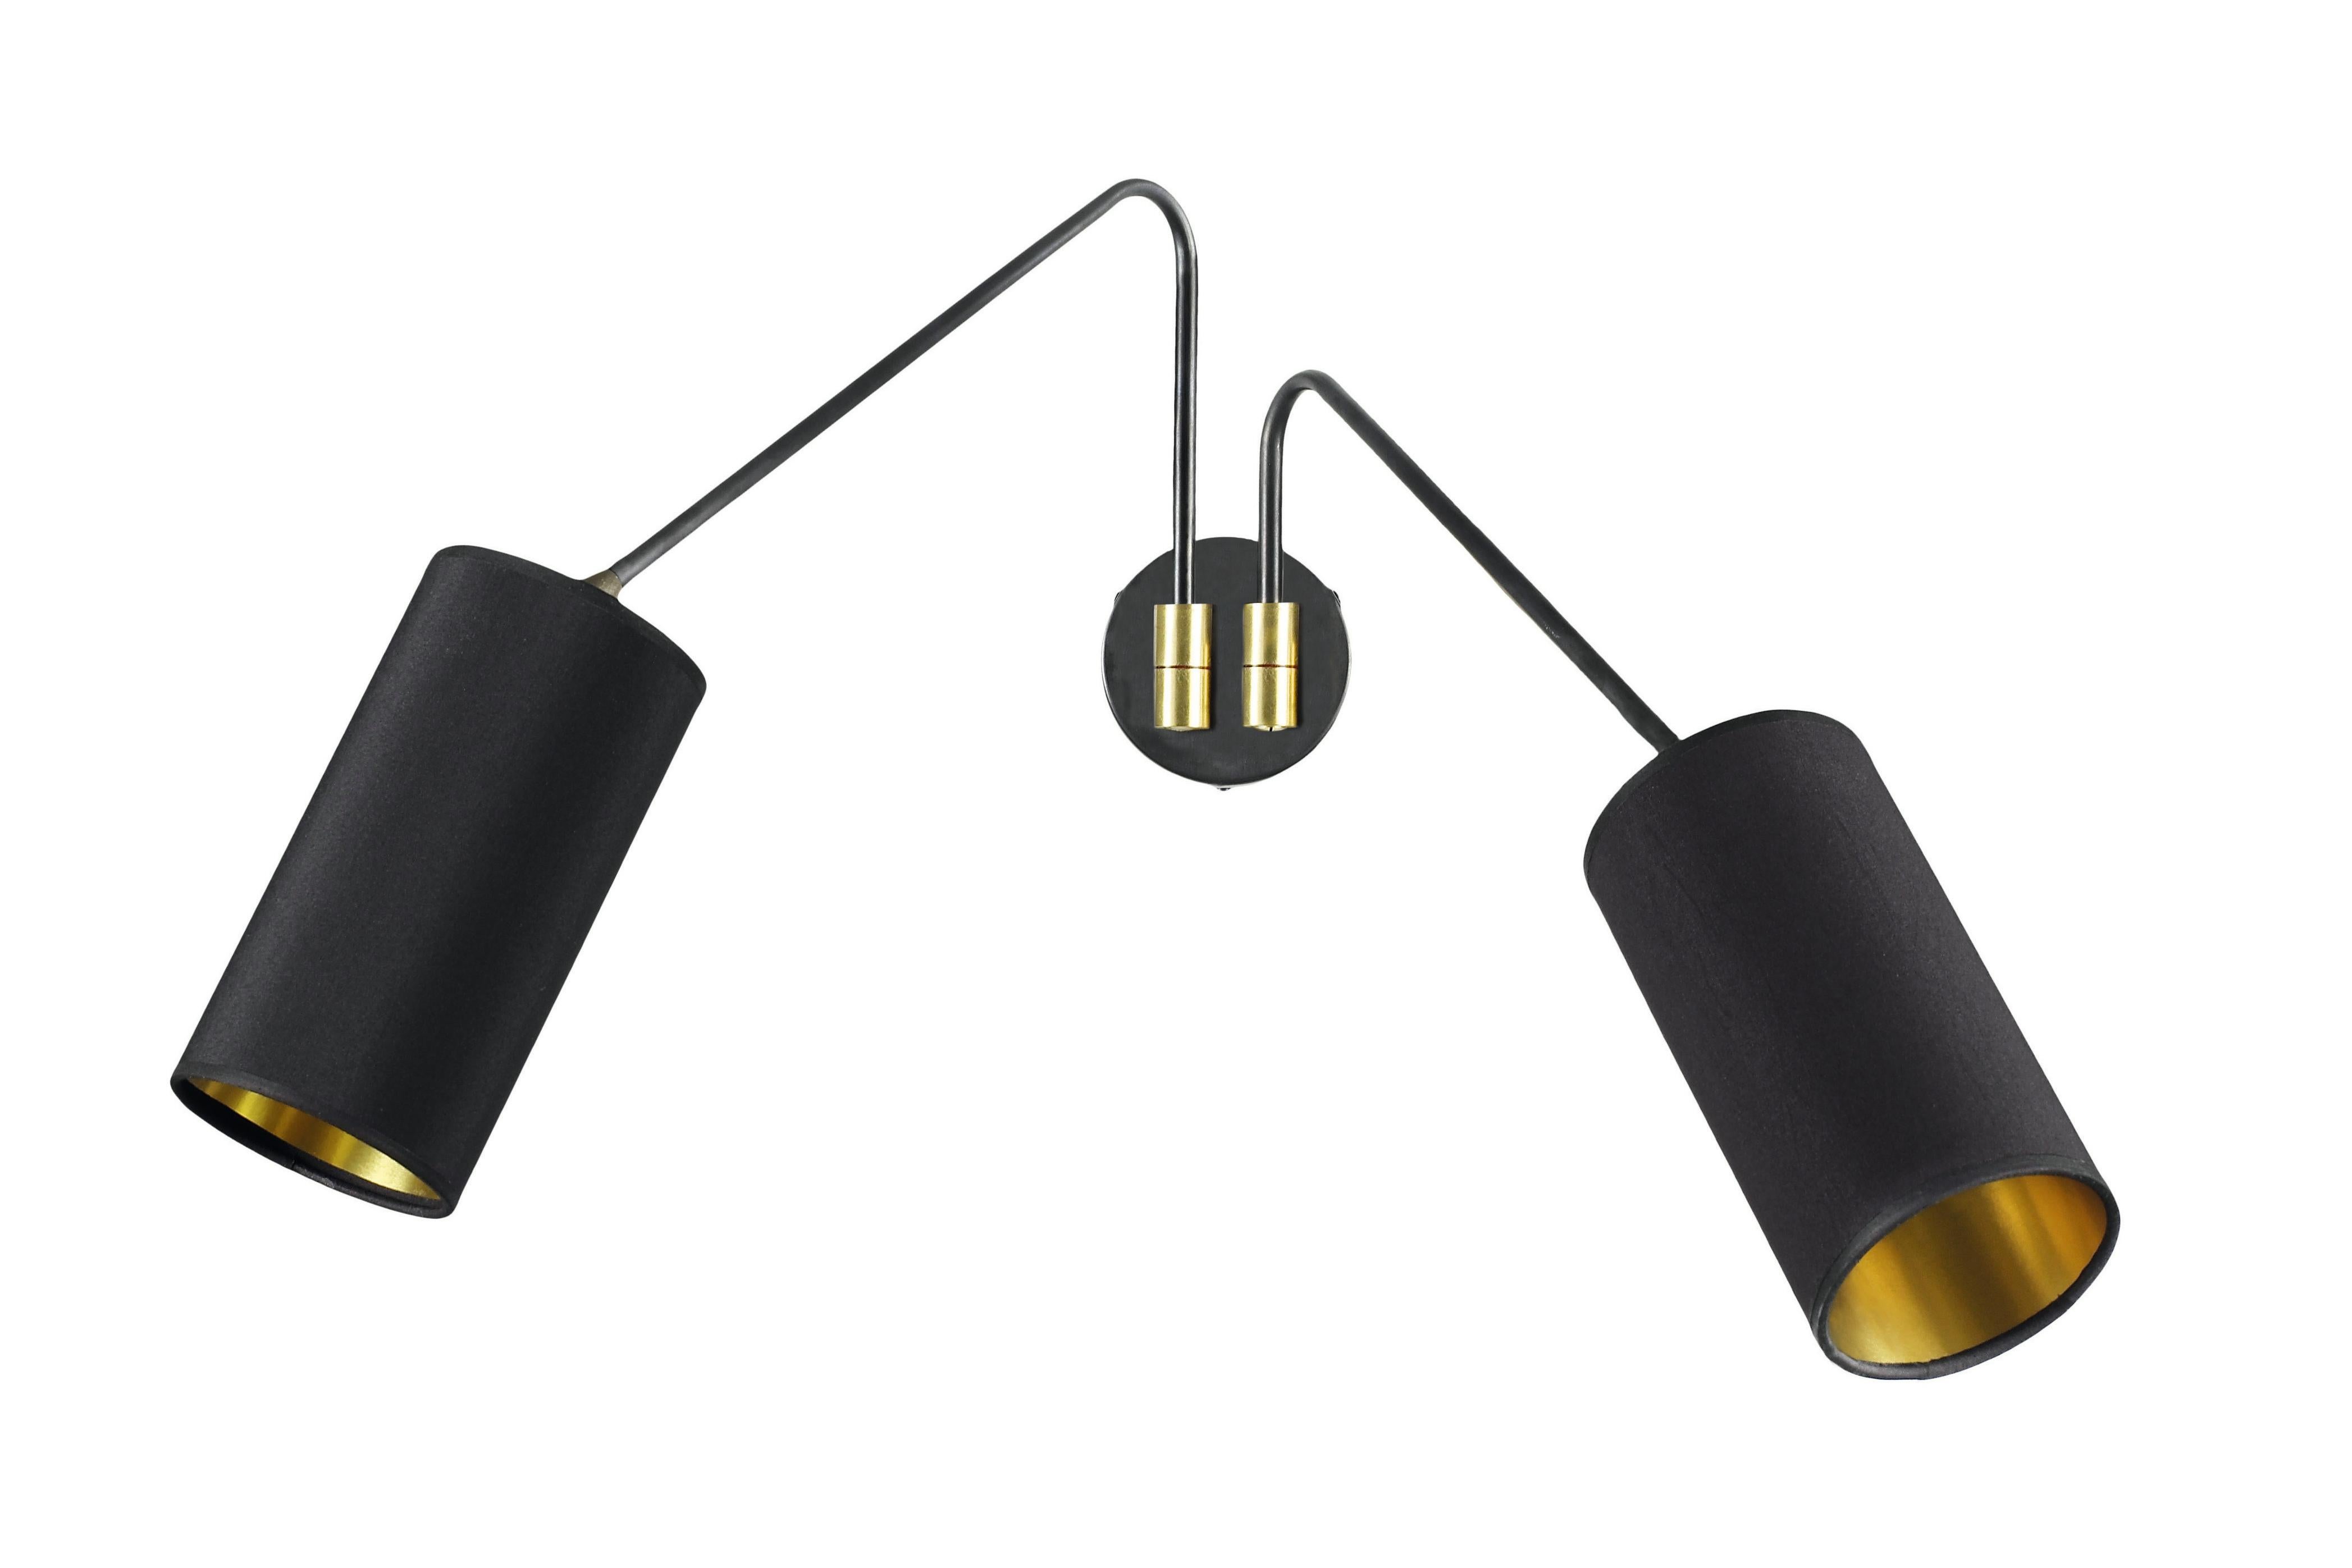 Array twin cotton wall light by CTO Lighting
Materials: Bronze with satin brass details, Black cotton shades/gold lining
Dimensions: 90 x 40 cm

All our lamps can be wired according to each country. If sold to the USA it will be wired for the